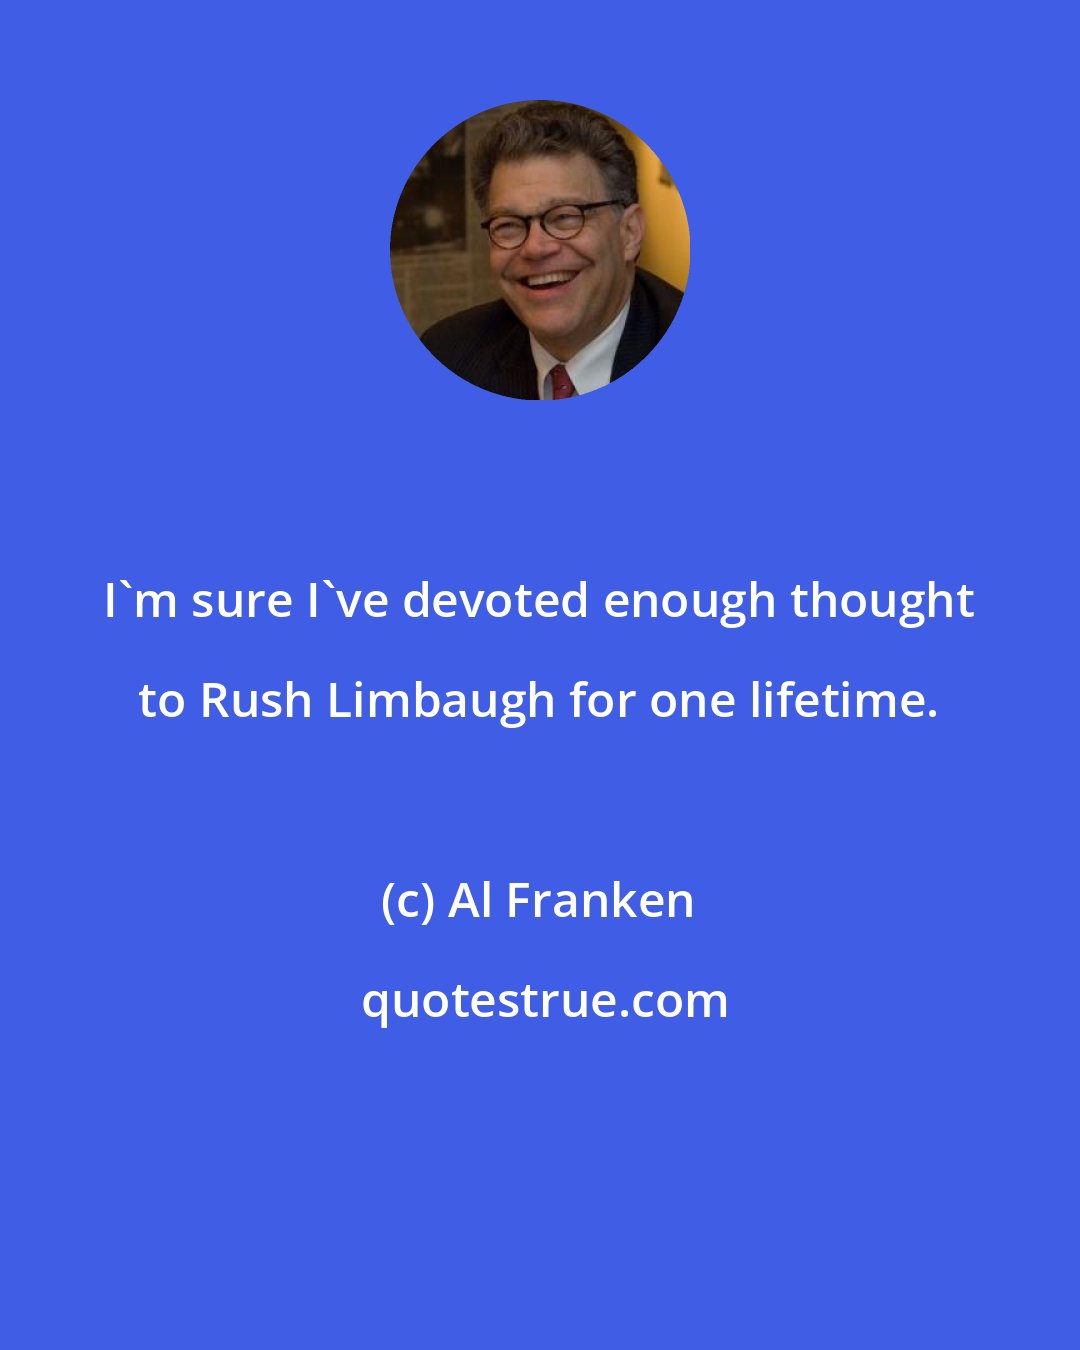 Al Franken: I'm sure I've devoted enough thought to Rush Limbaugh for one lifetime.